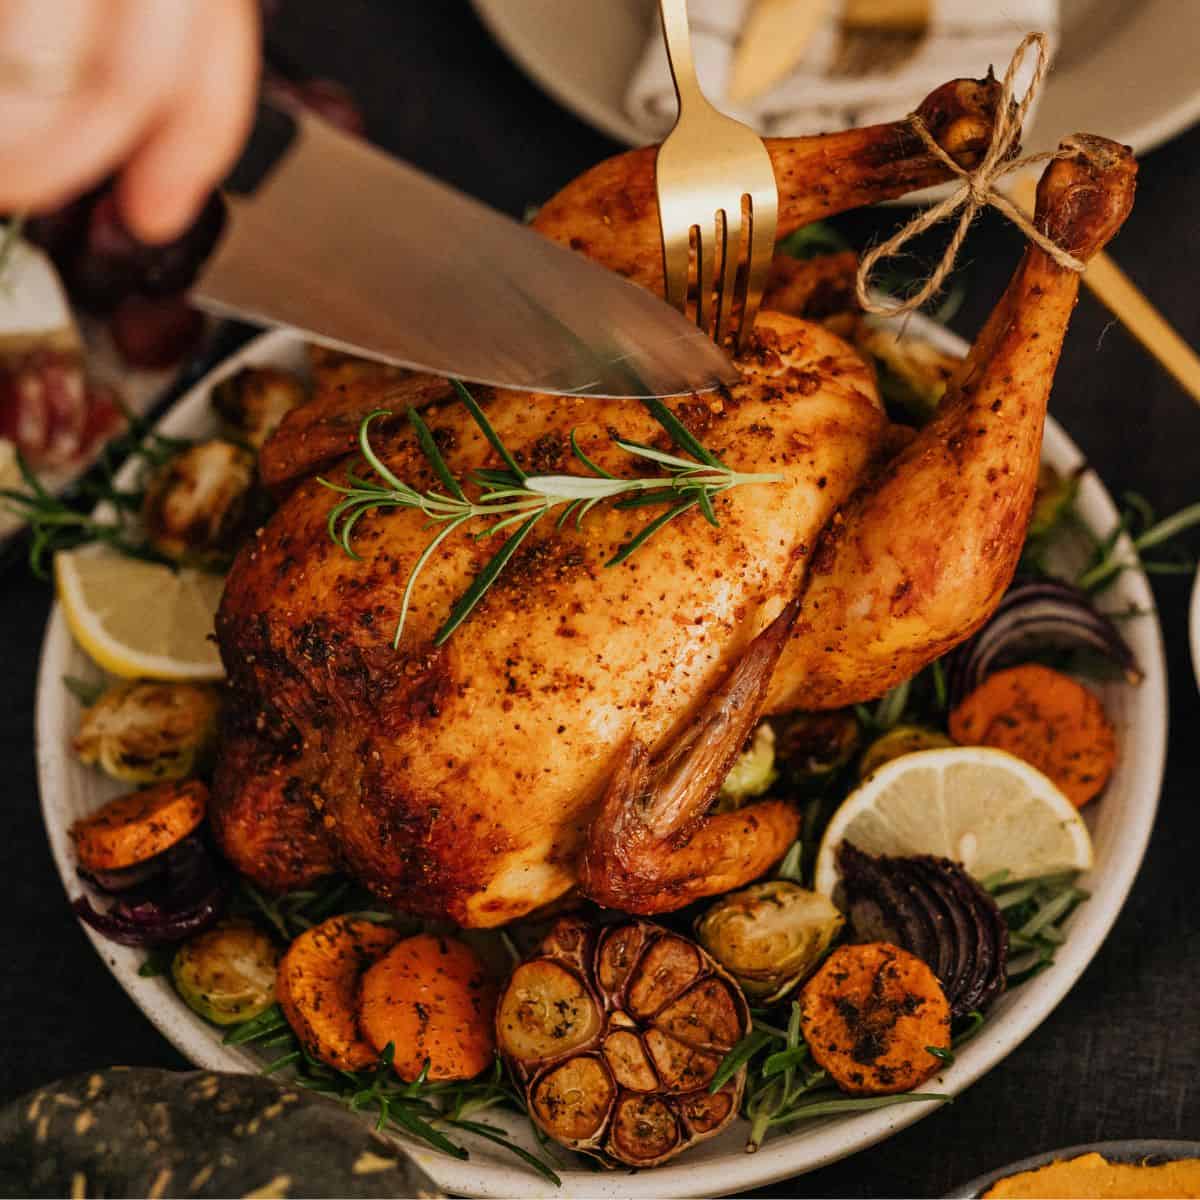 Roast Chicken with herbs and spices in a round baking dish.